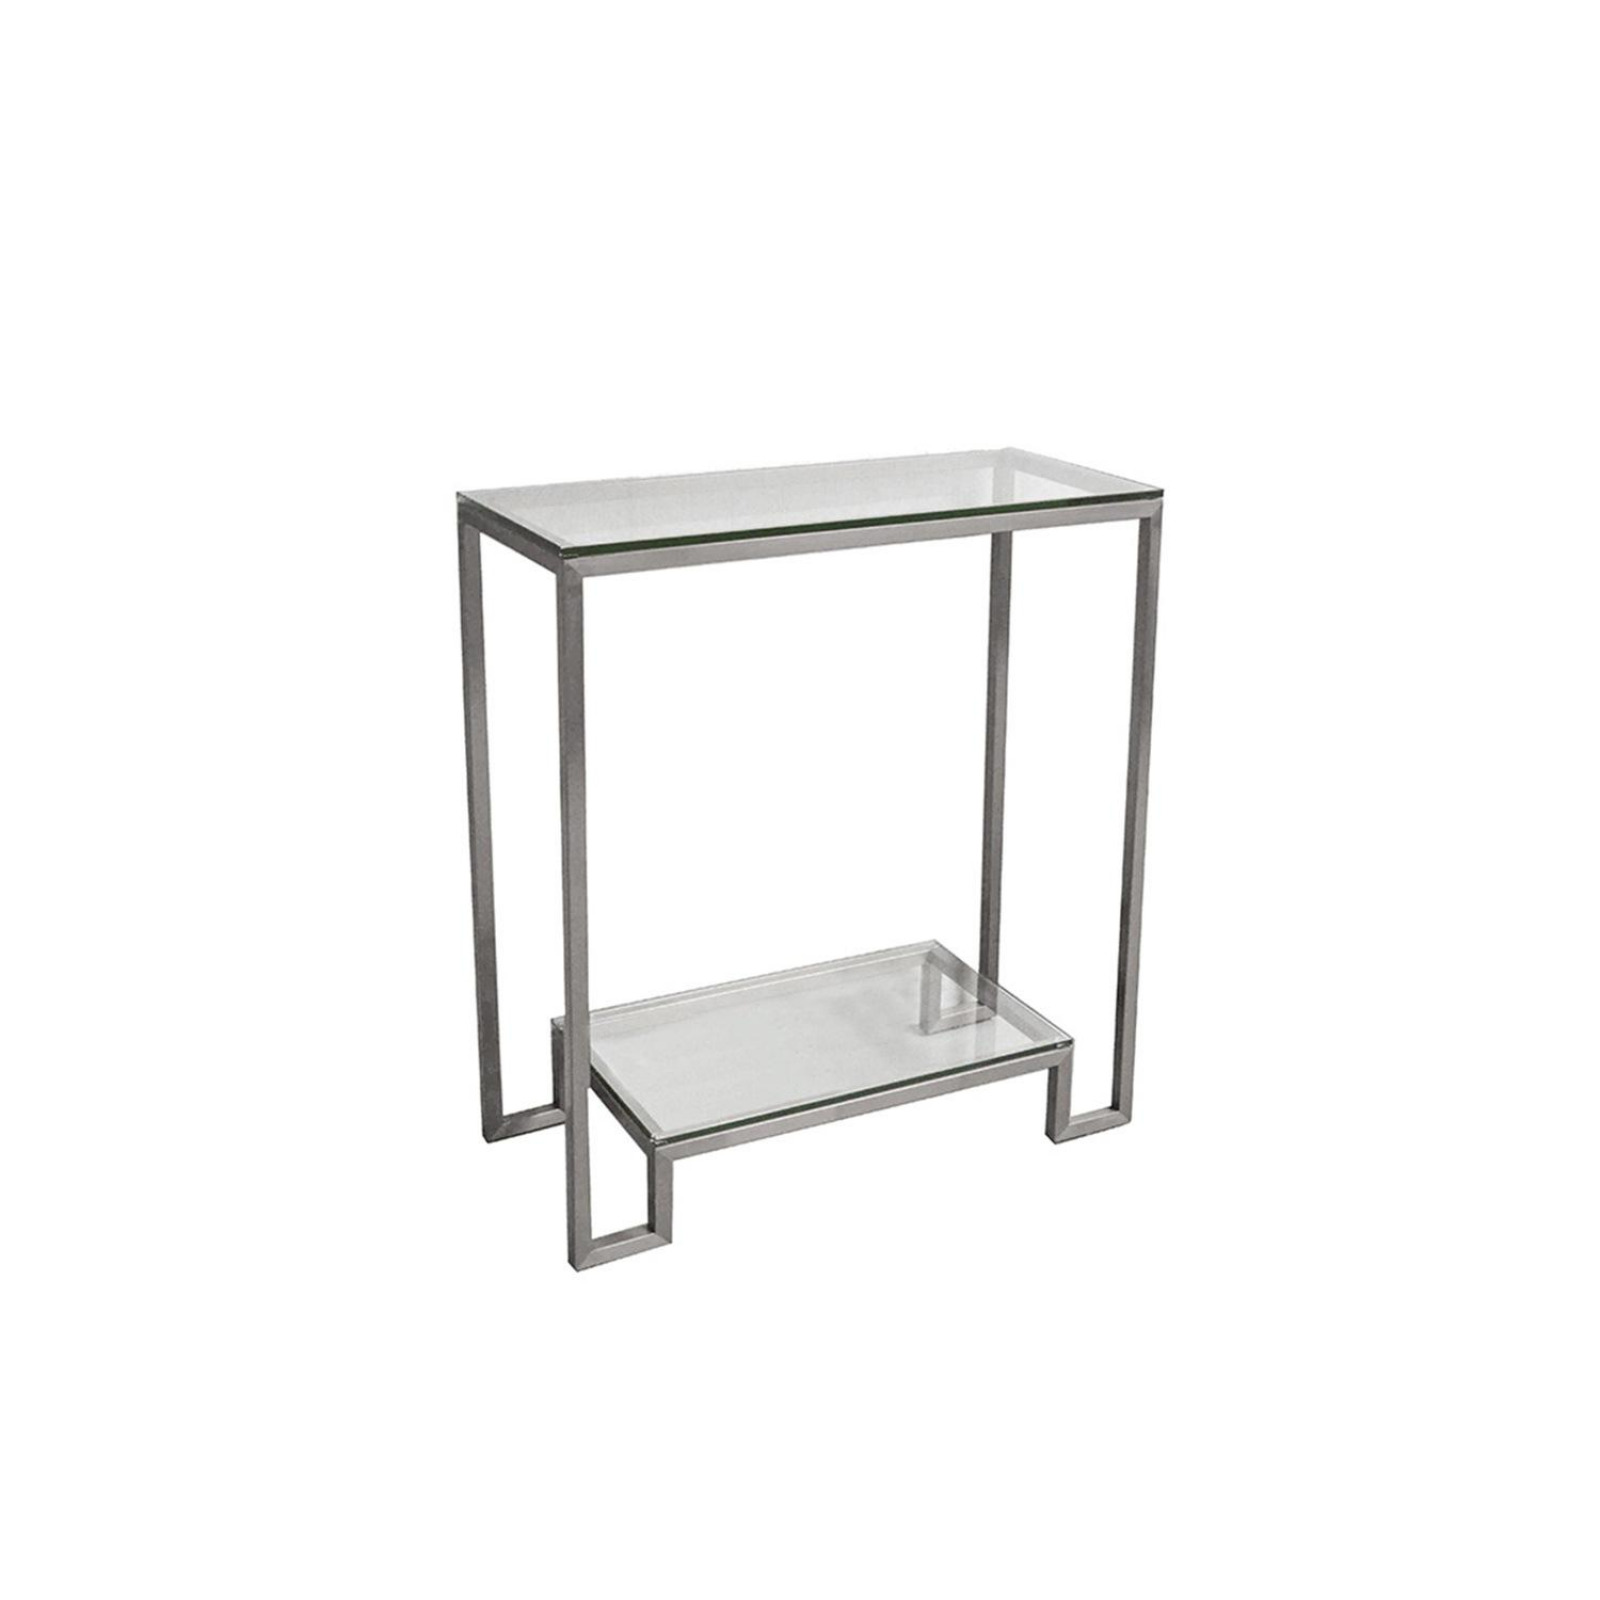 Ming silver CN70 console table